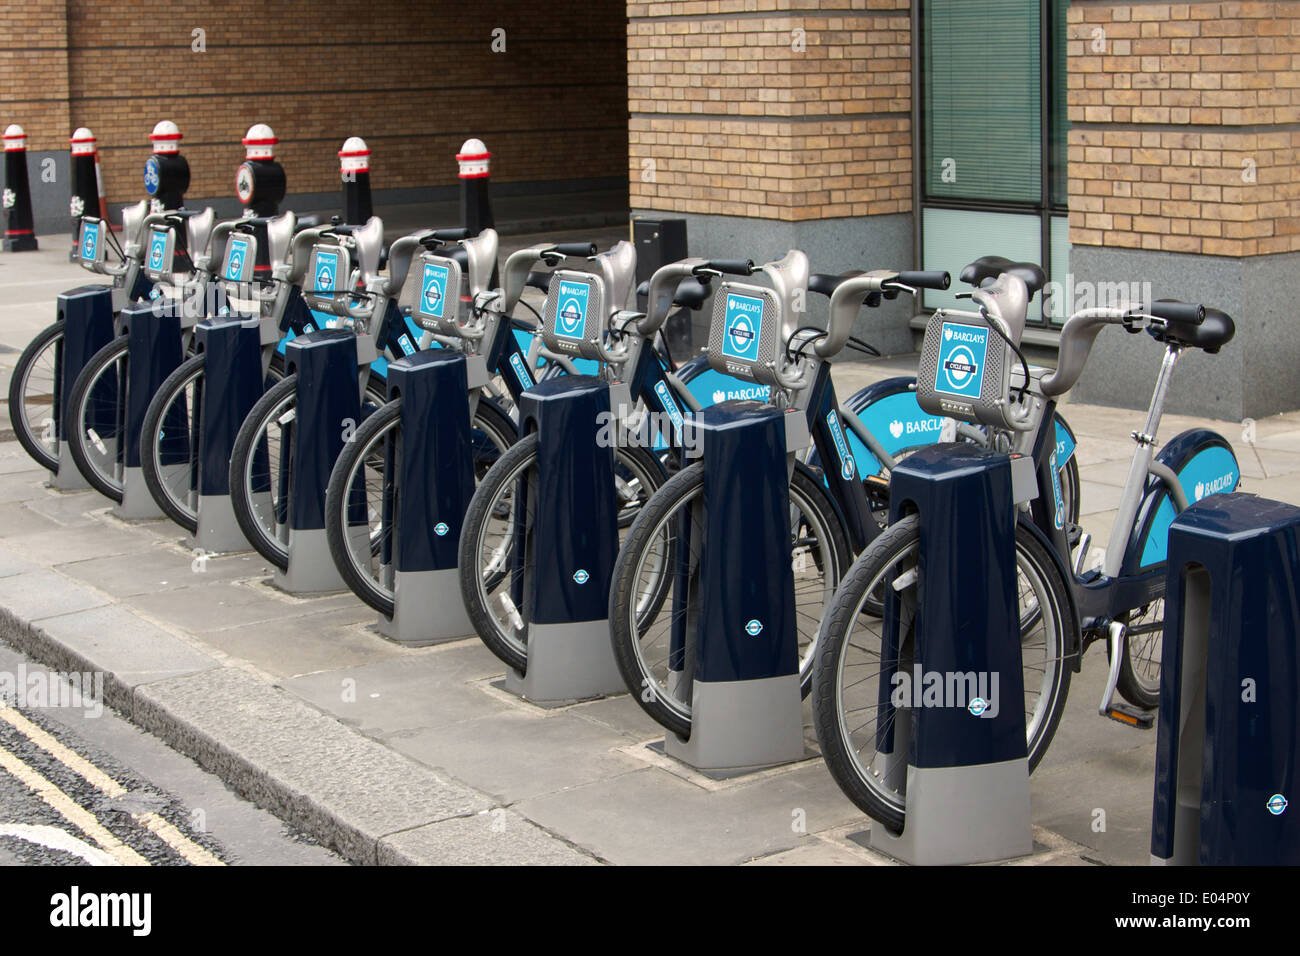 Row of bikes for hire - also known as 'Boris Bikes' after Boris Johnson, the London Mayor who introduced them. Stock Photo